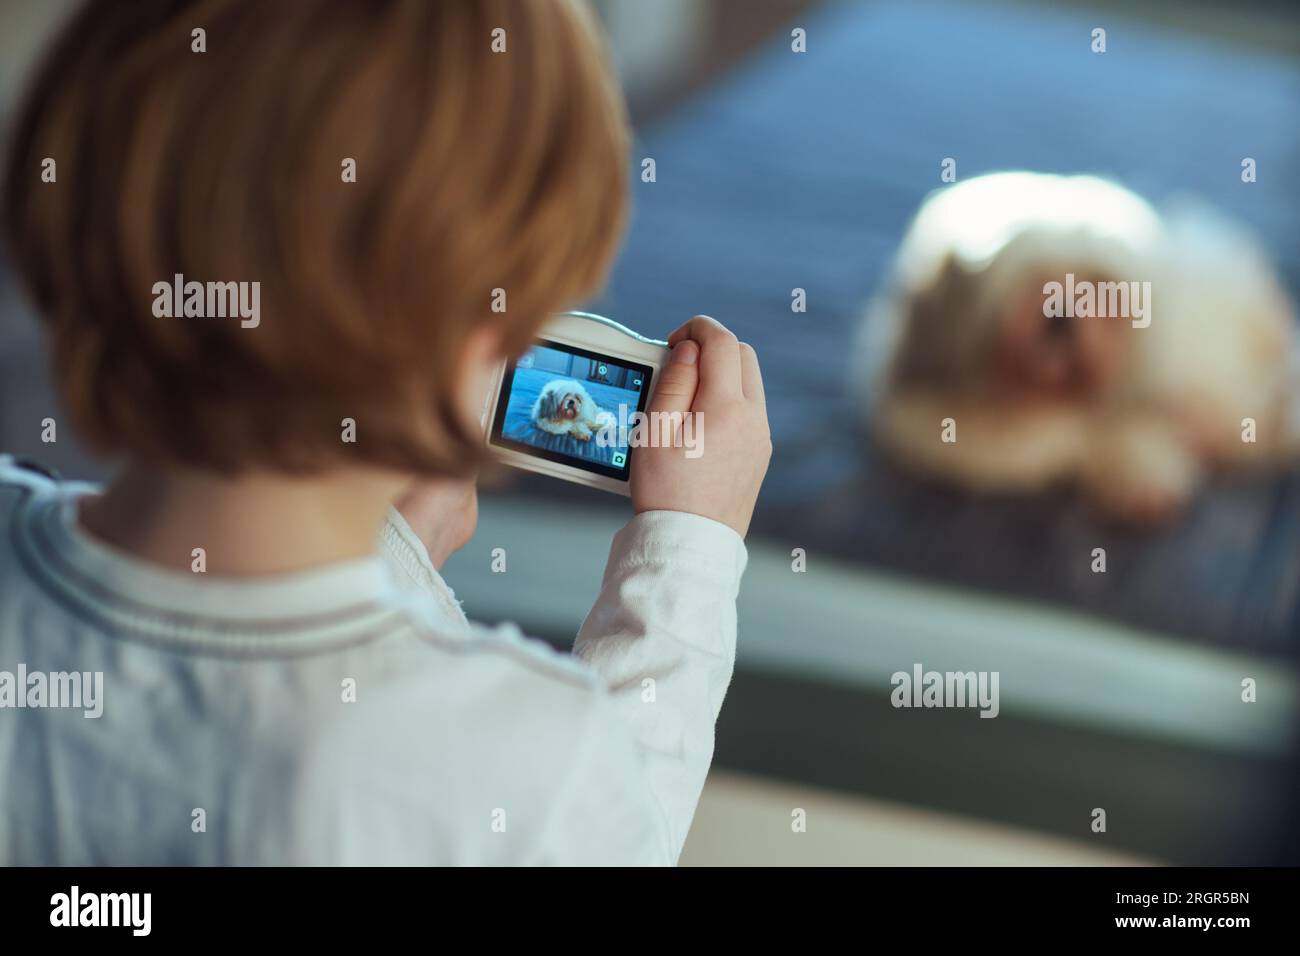 Baby takes pictures of his dog at home, focus on screen Stock Photo